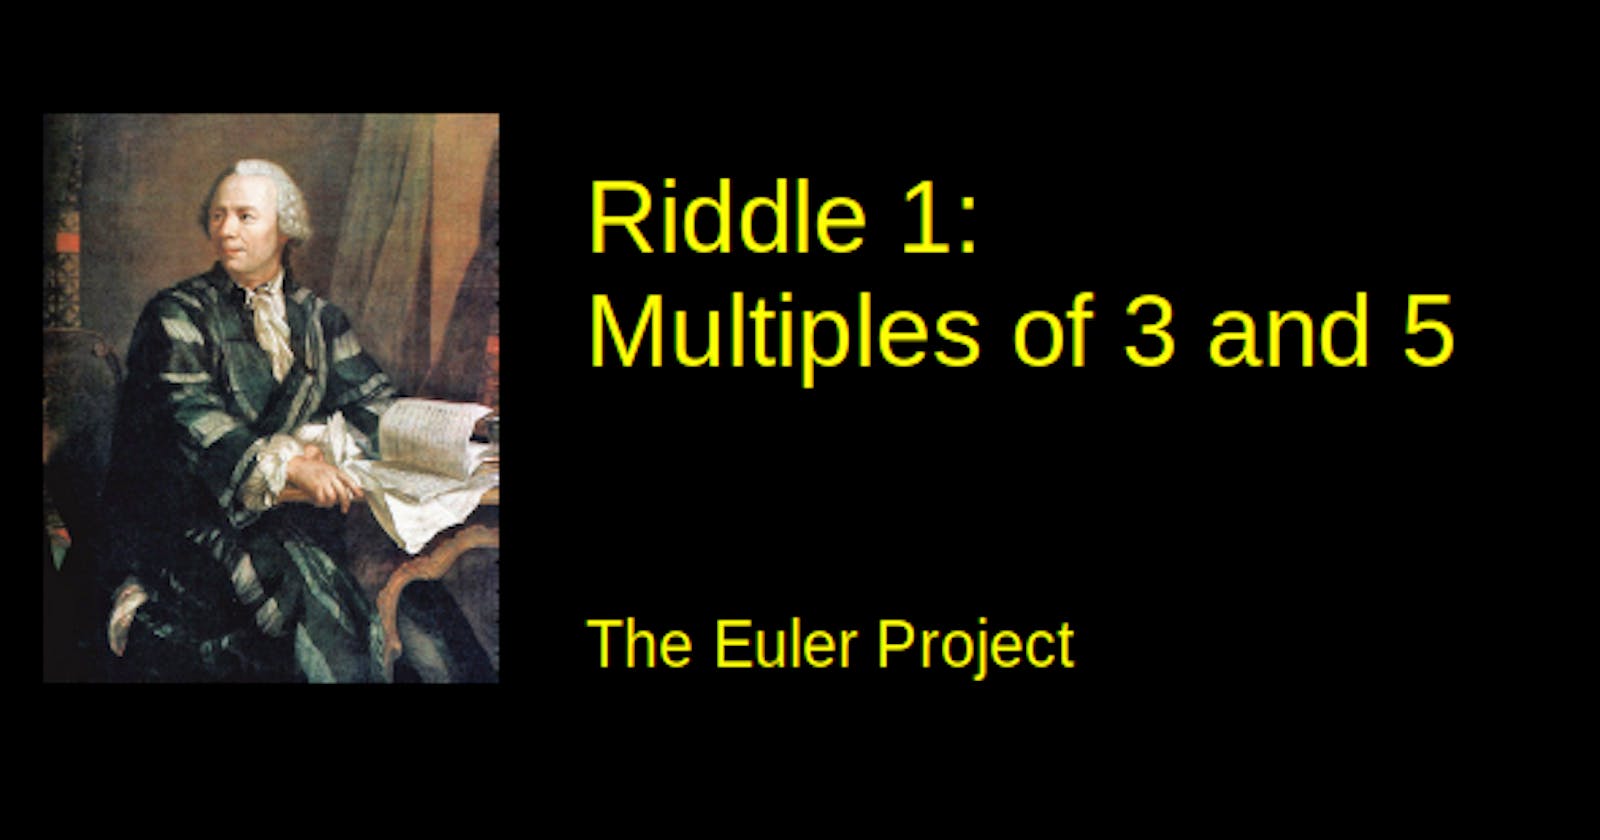 Riddle 1: Multiples of 3 or 5